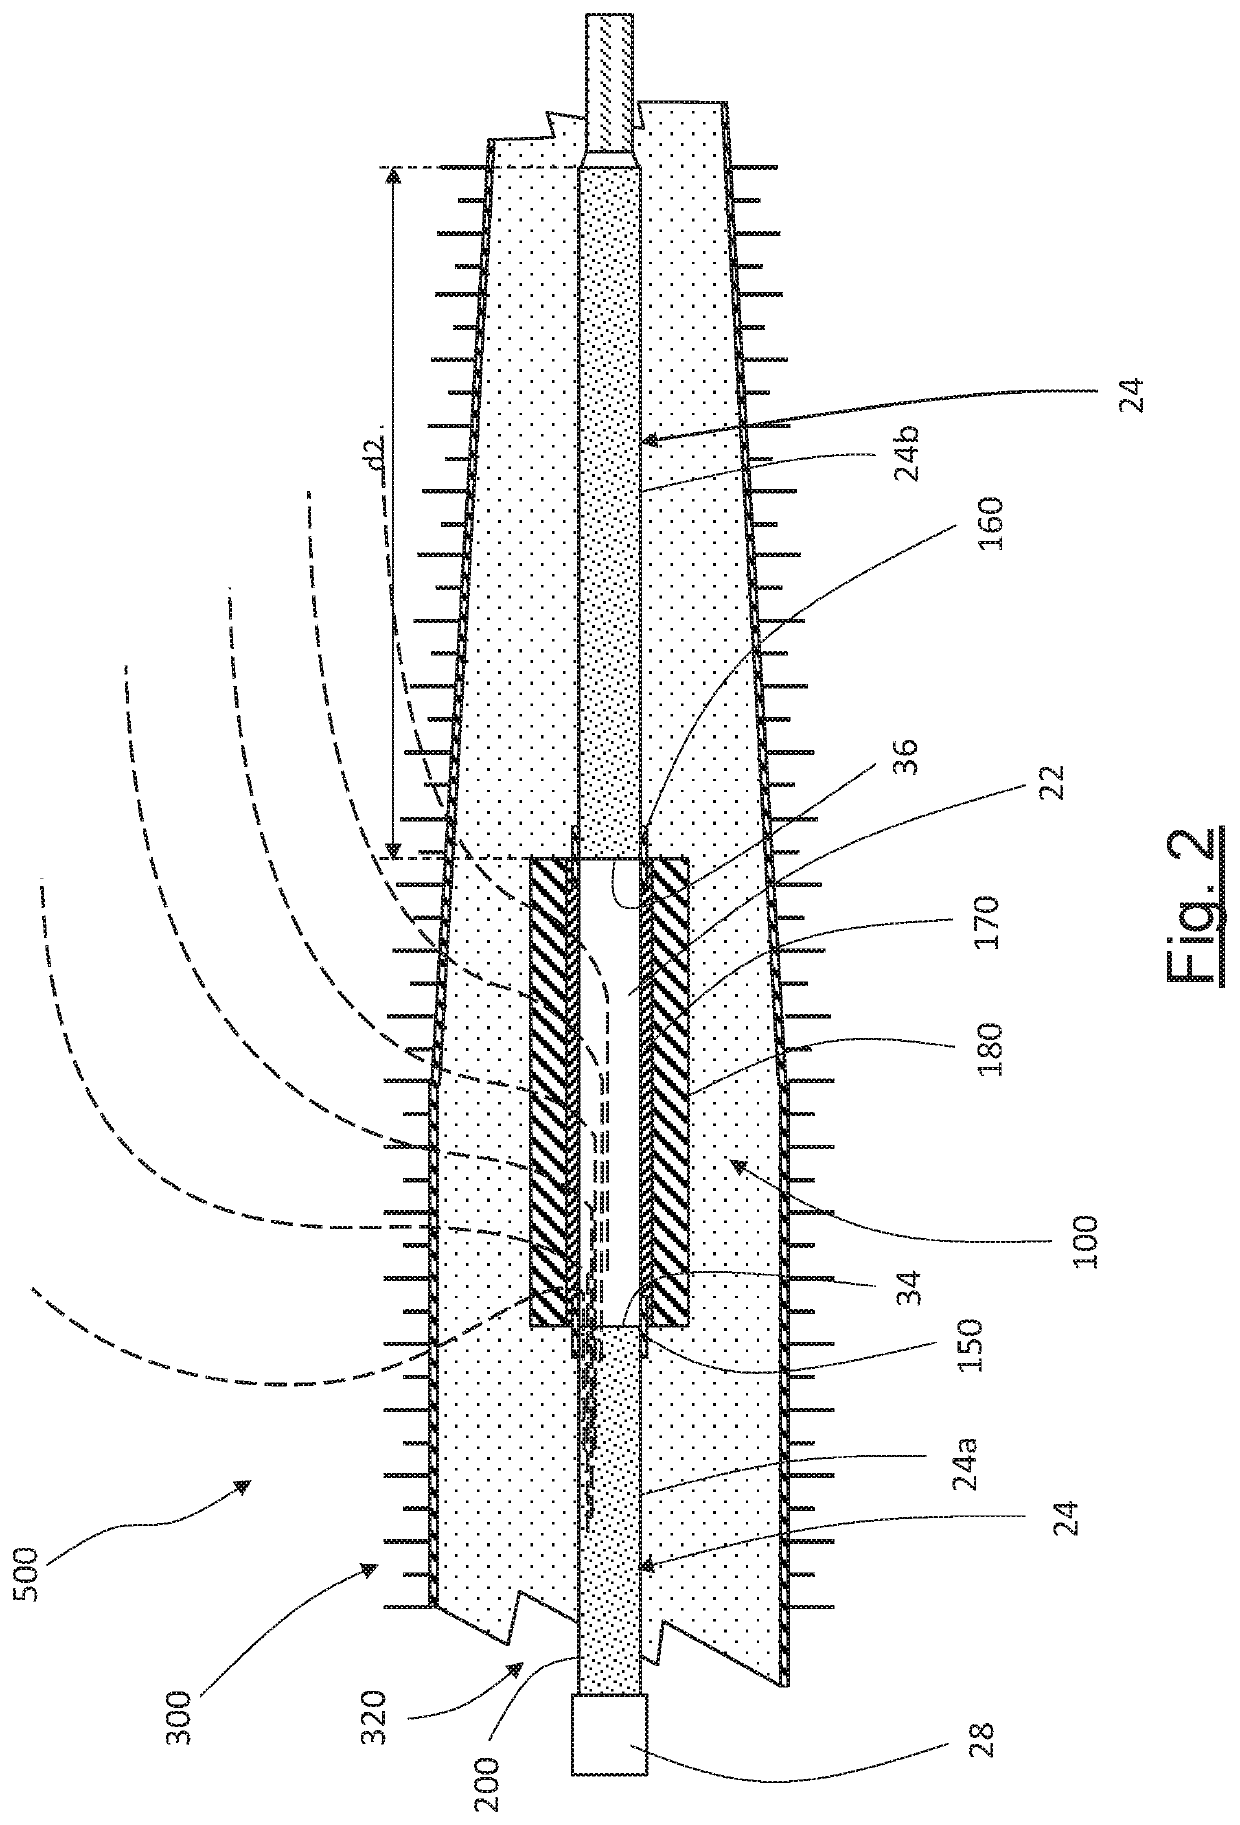 Cable termination system, termination assembly and method for installing such a termination assembly